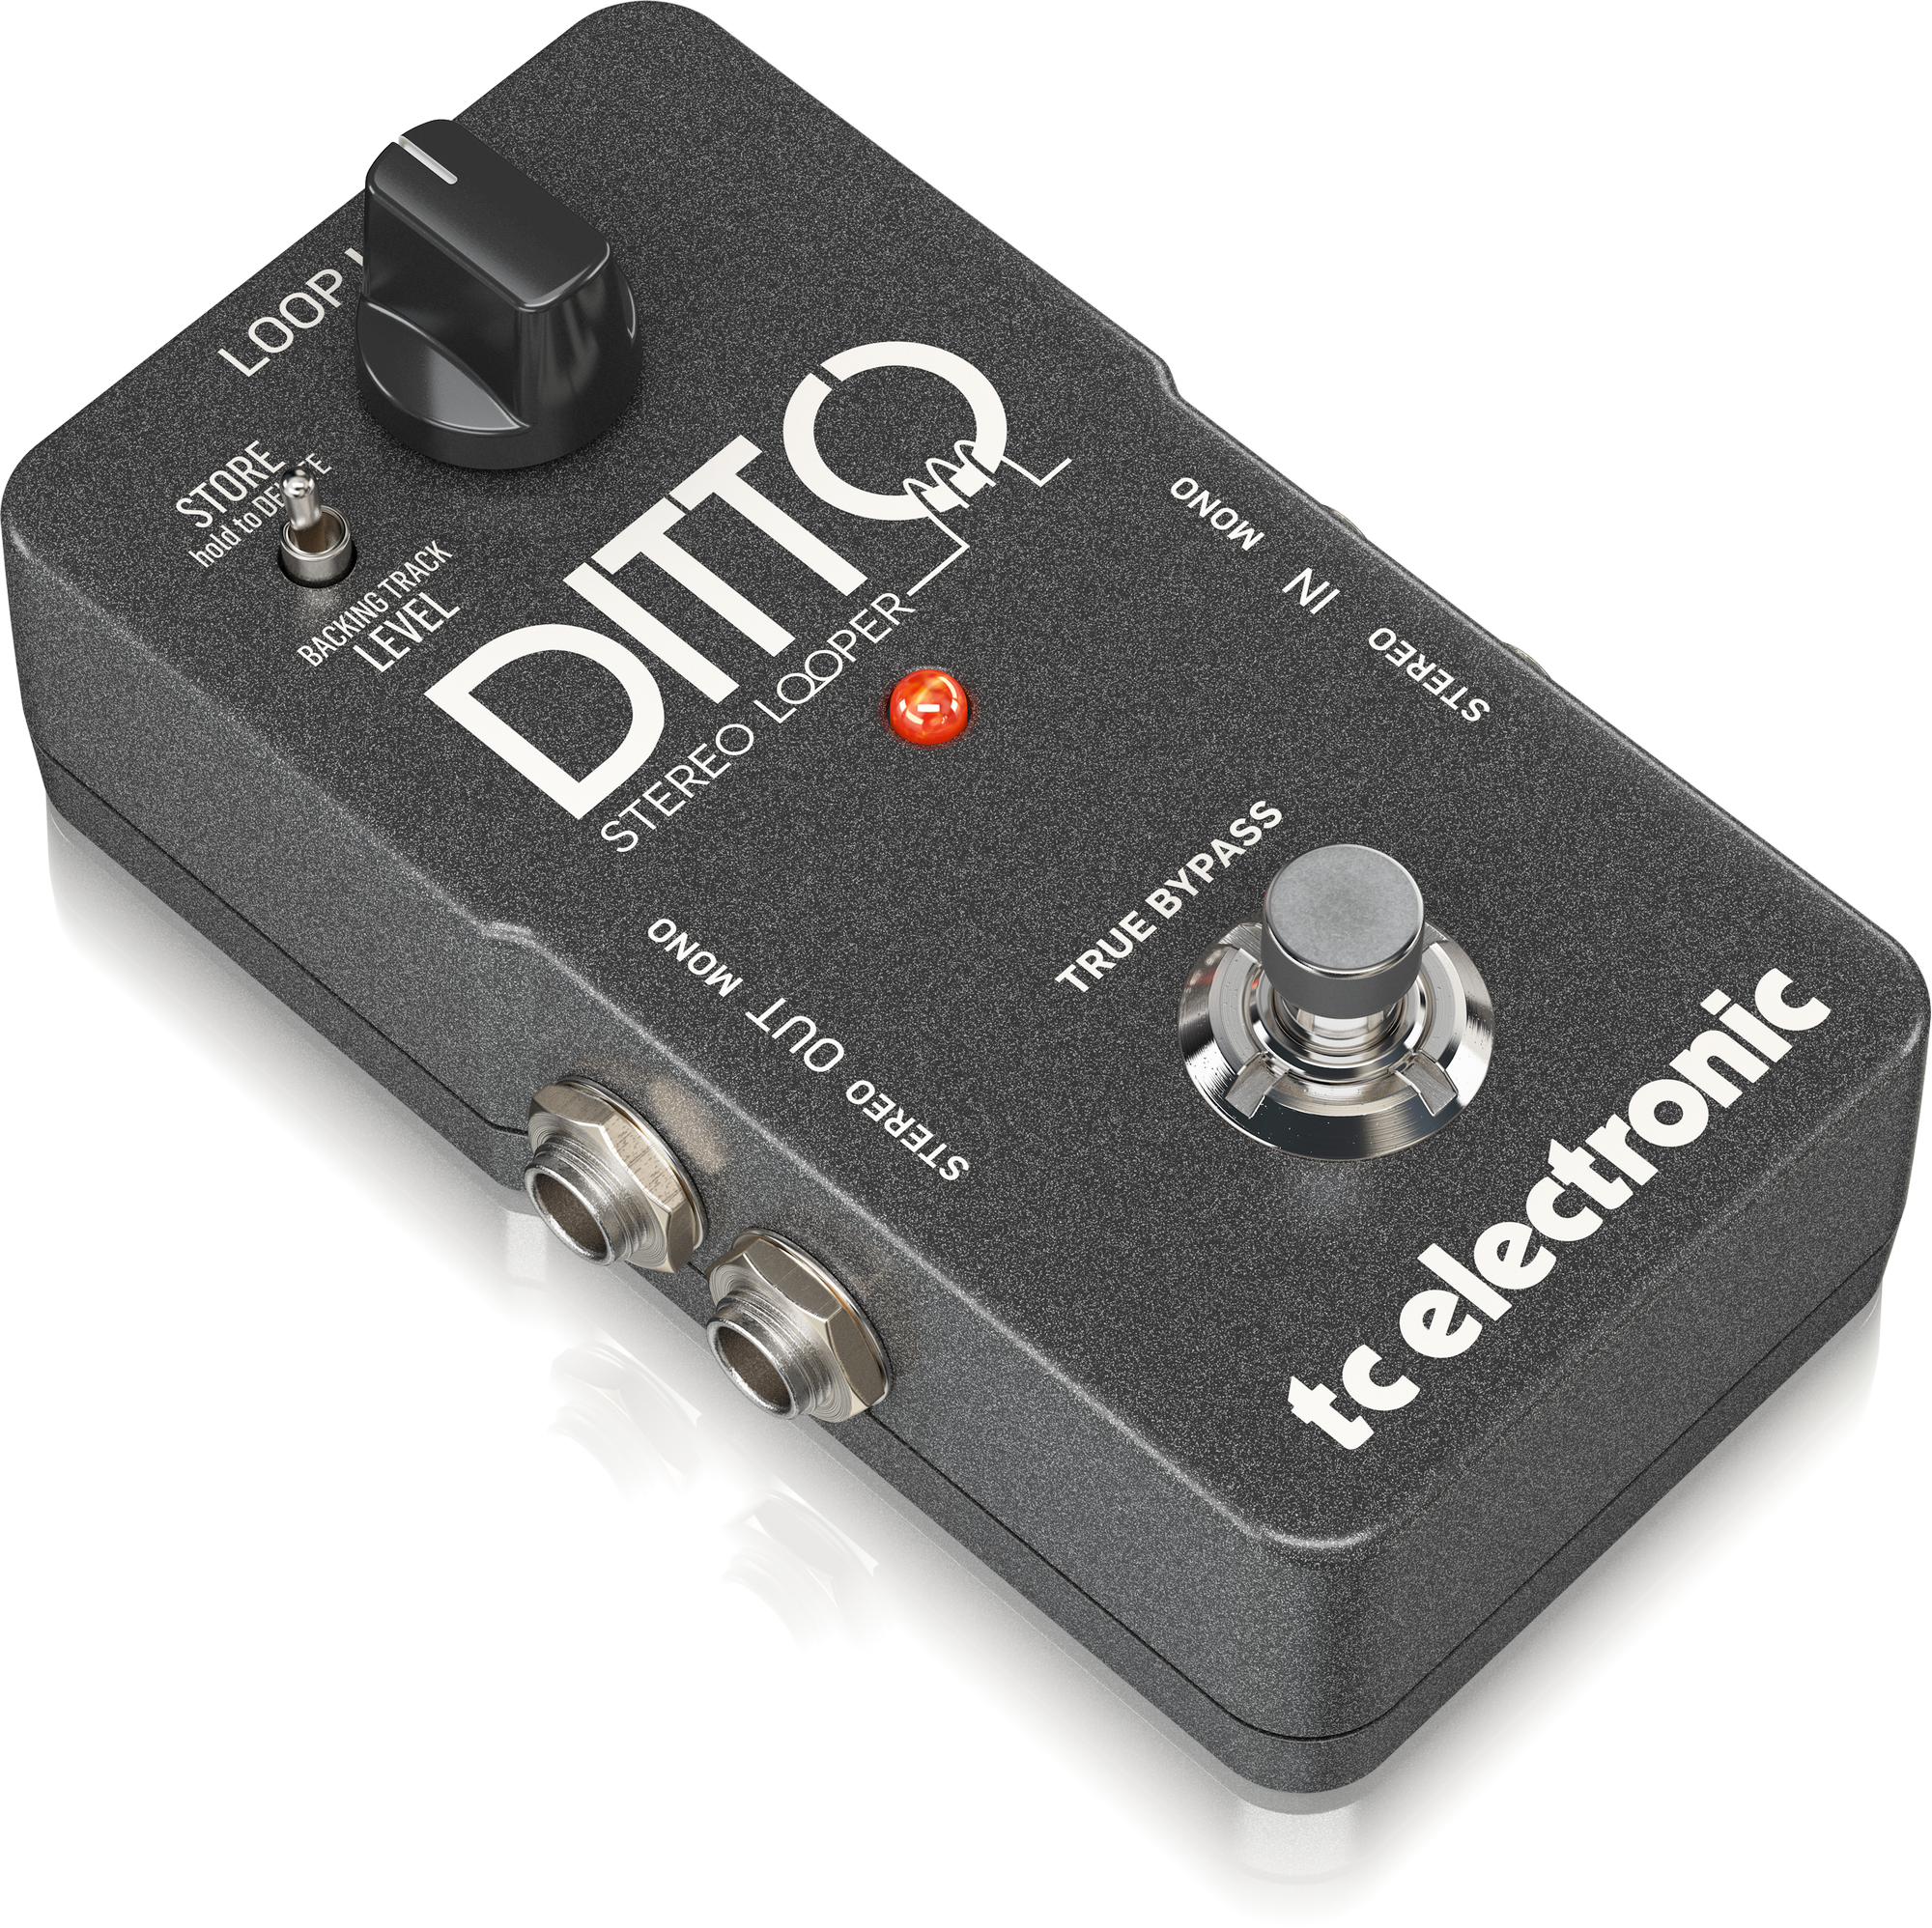 TC Electronic Electric Guitar Single Effect (DITTO+ LOOPER), TC ELECTRONIC, EFFECTS, tc-electronic-effects-tc-ditto-stereo-looper, ZOSO MUSIC SDN BHD